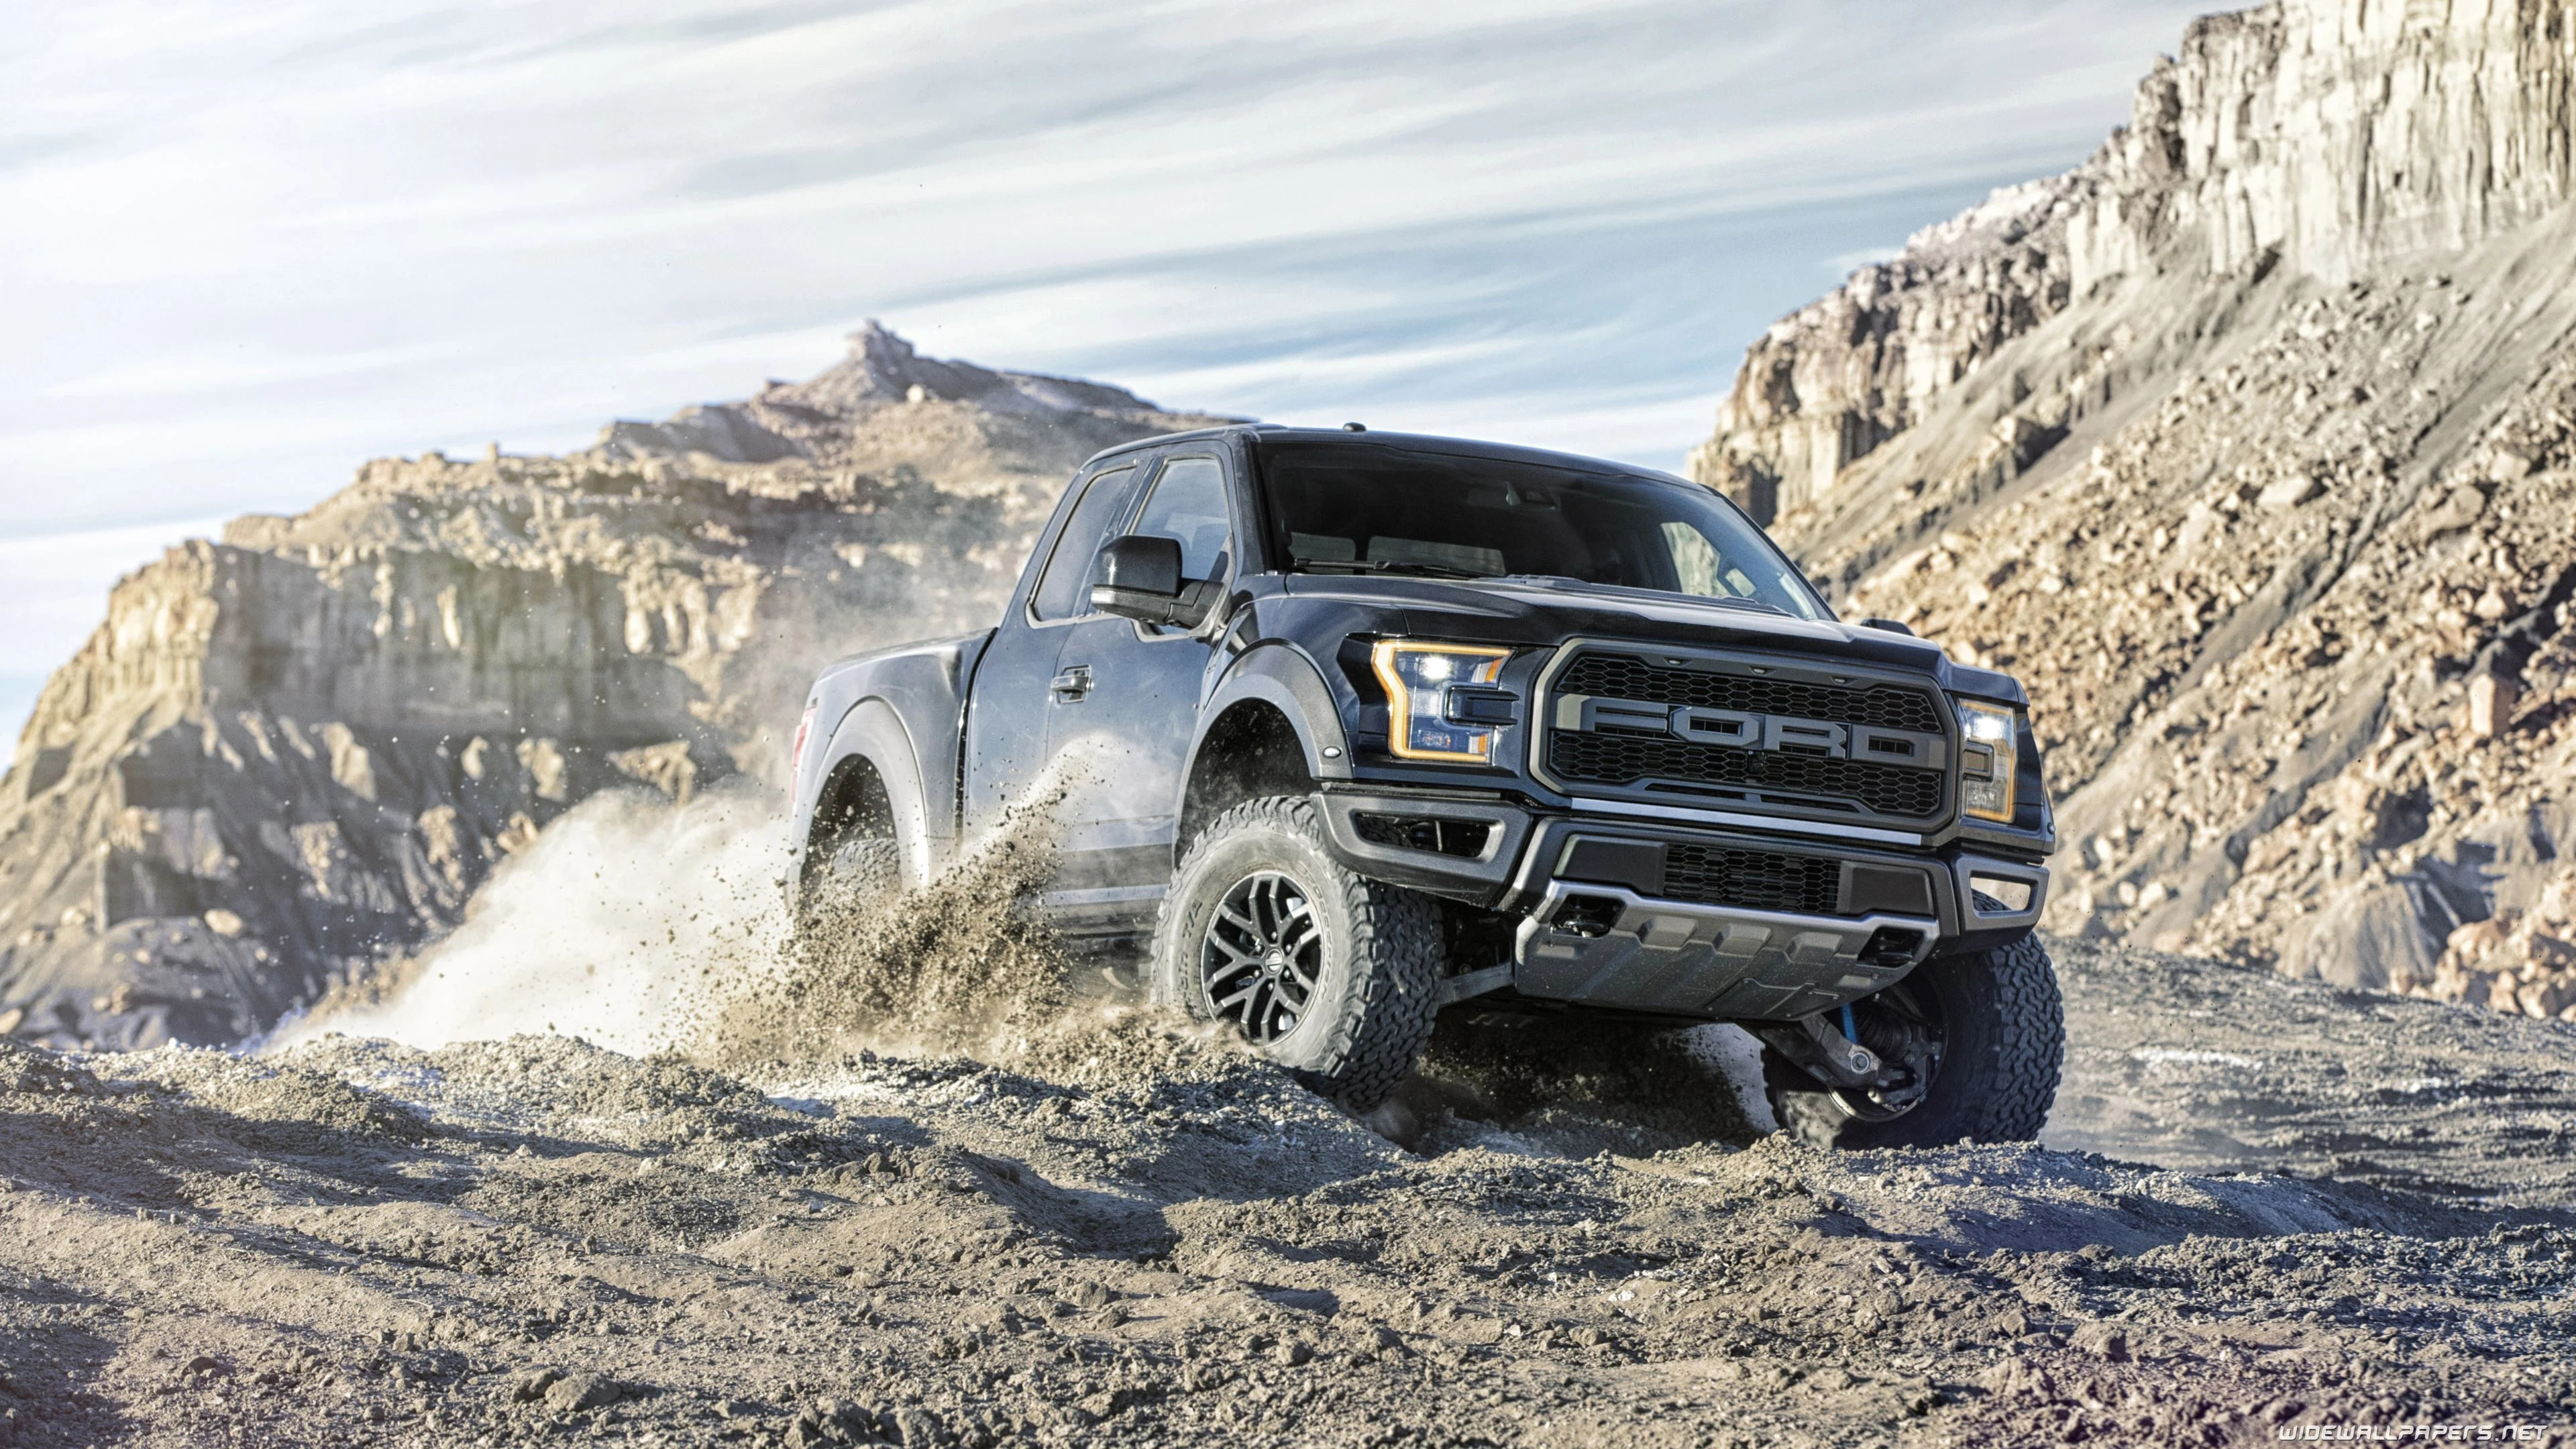 Off-road Driving: Ford F-150 Raptor, A trophy truck, Capable of driving on and off paved or gravel surface. 3840x2160 4K Wallpaper.